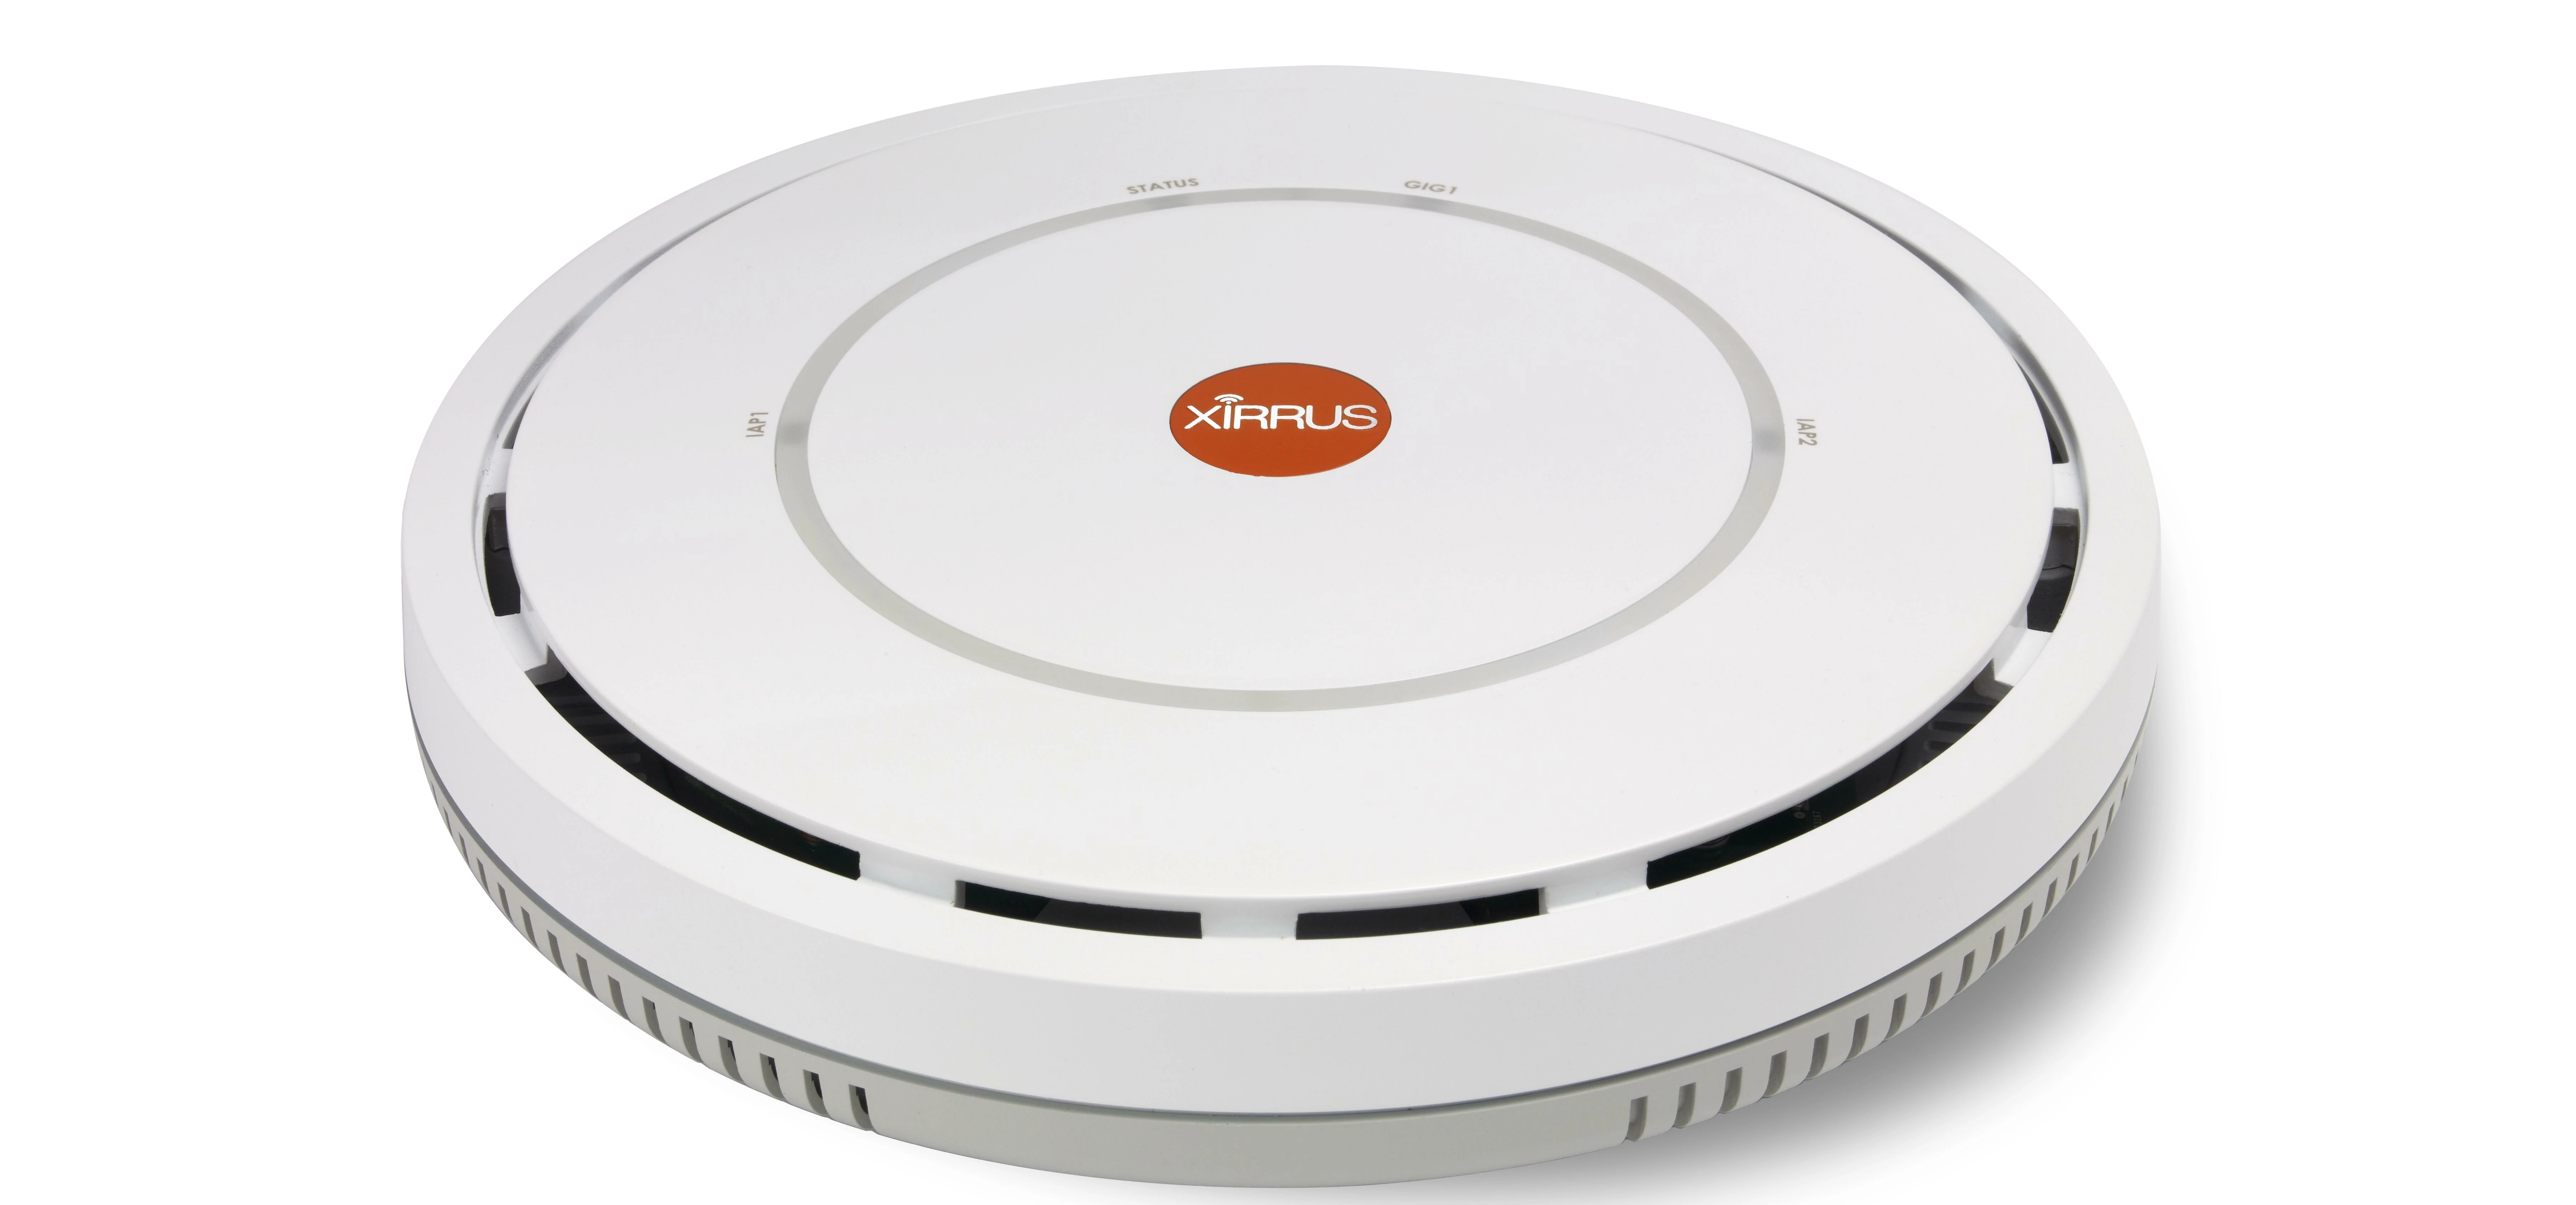 One of Xirrus' High Density Wi-Fi Access Points